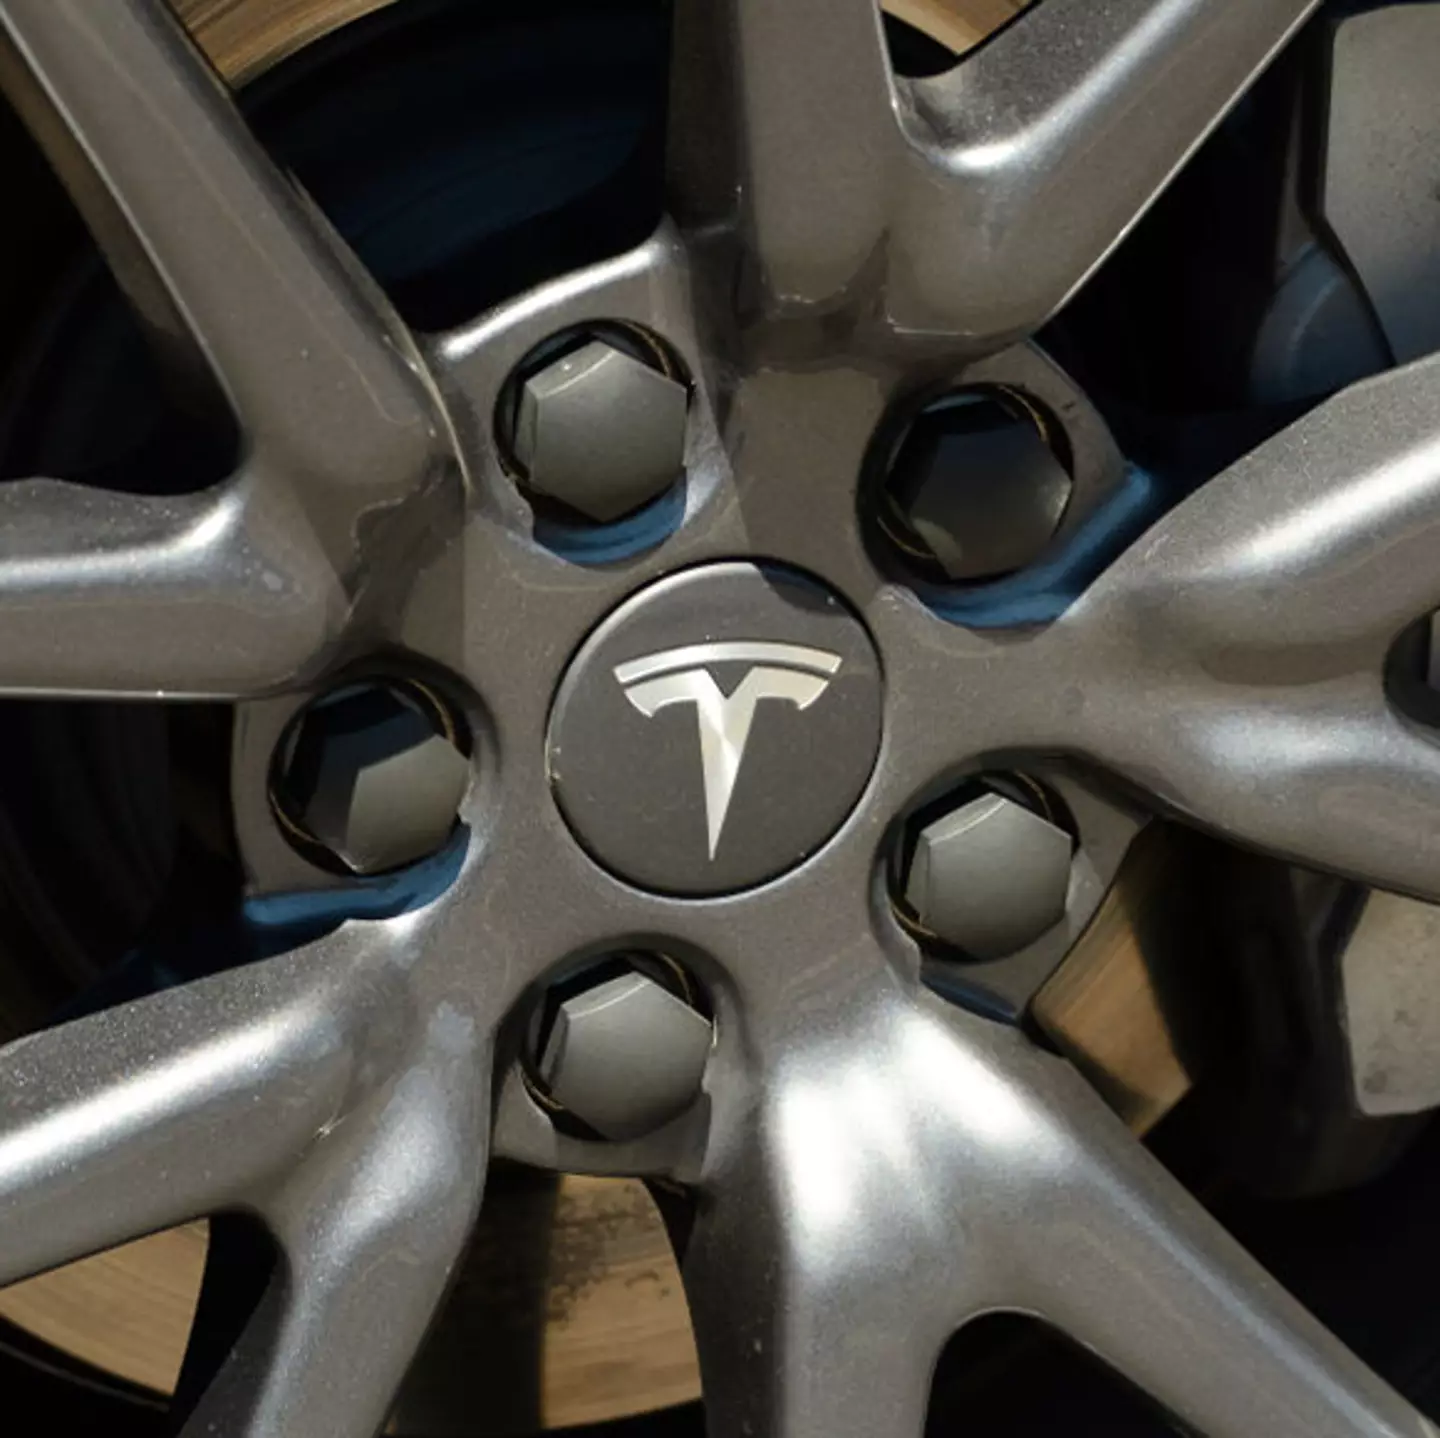 Reports show Tesla wheels are flying off vehicles whilst being driven